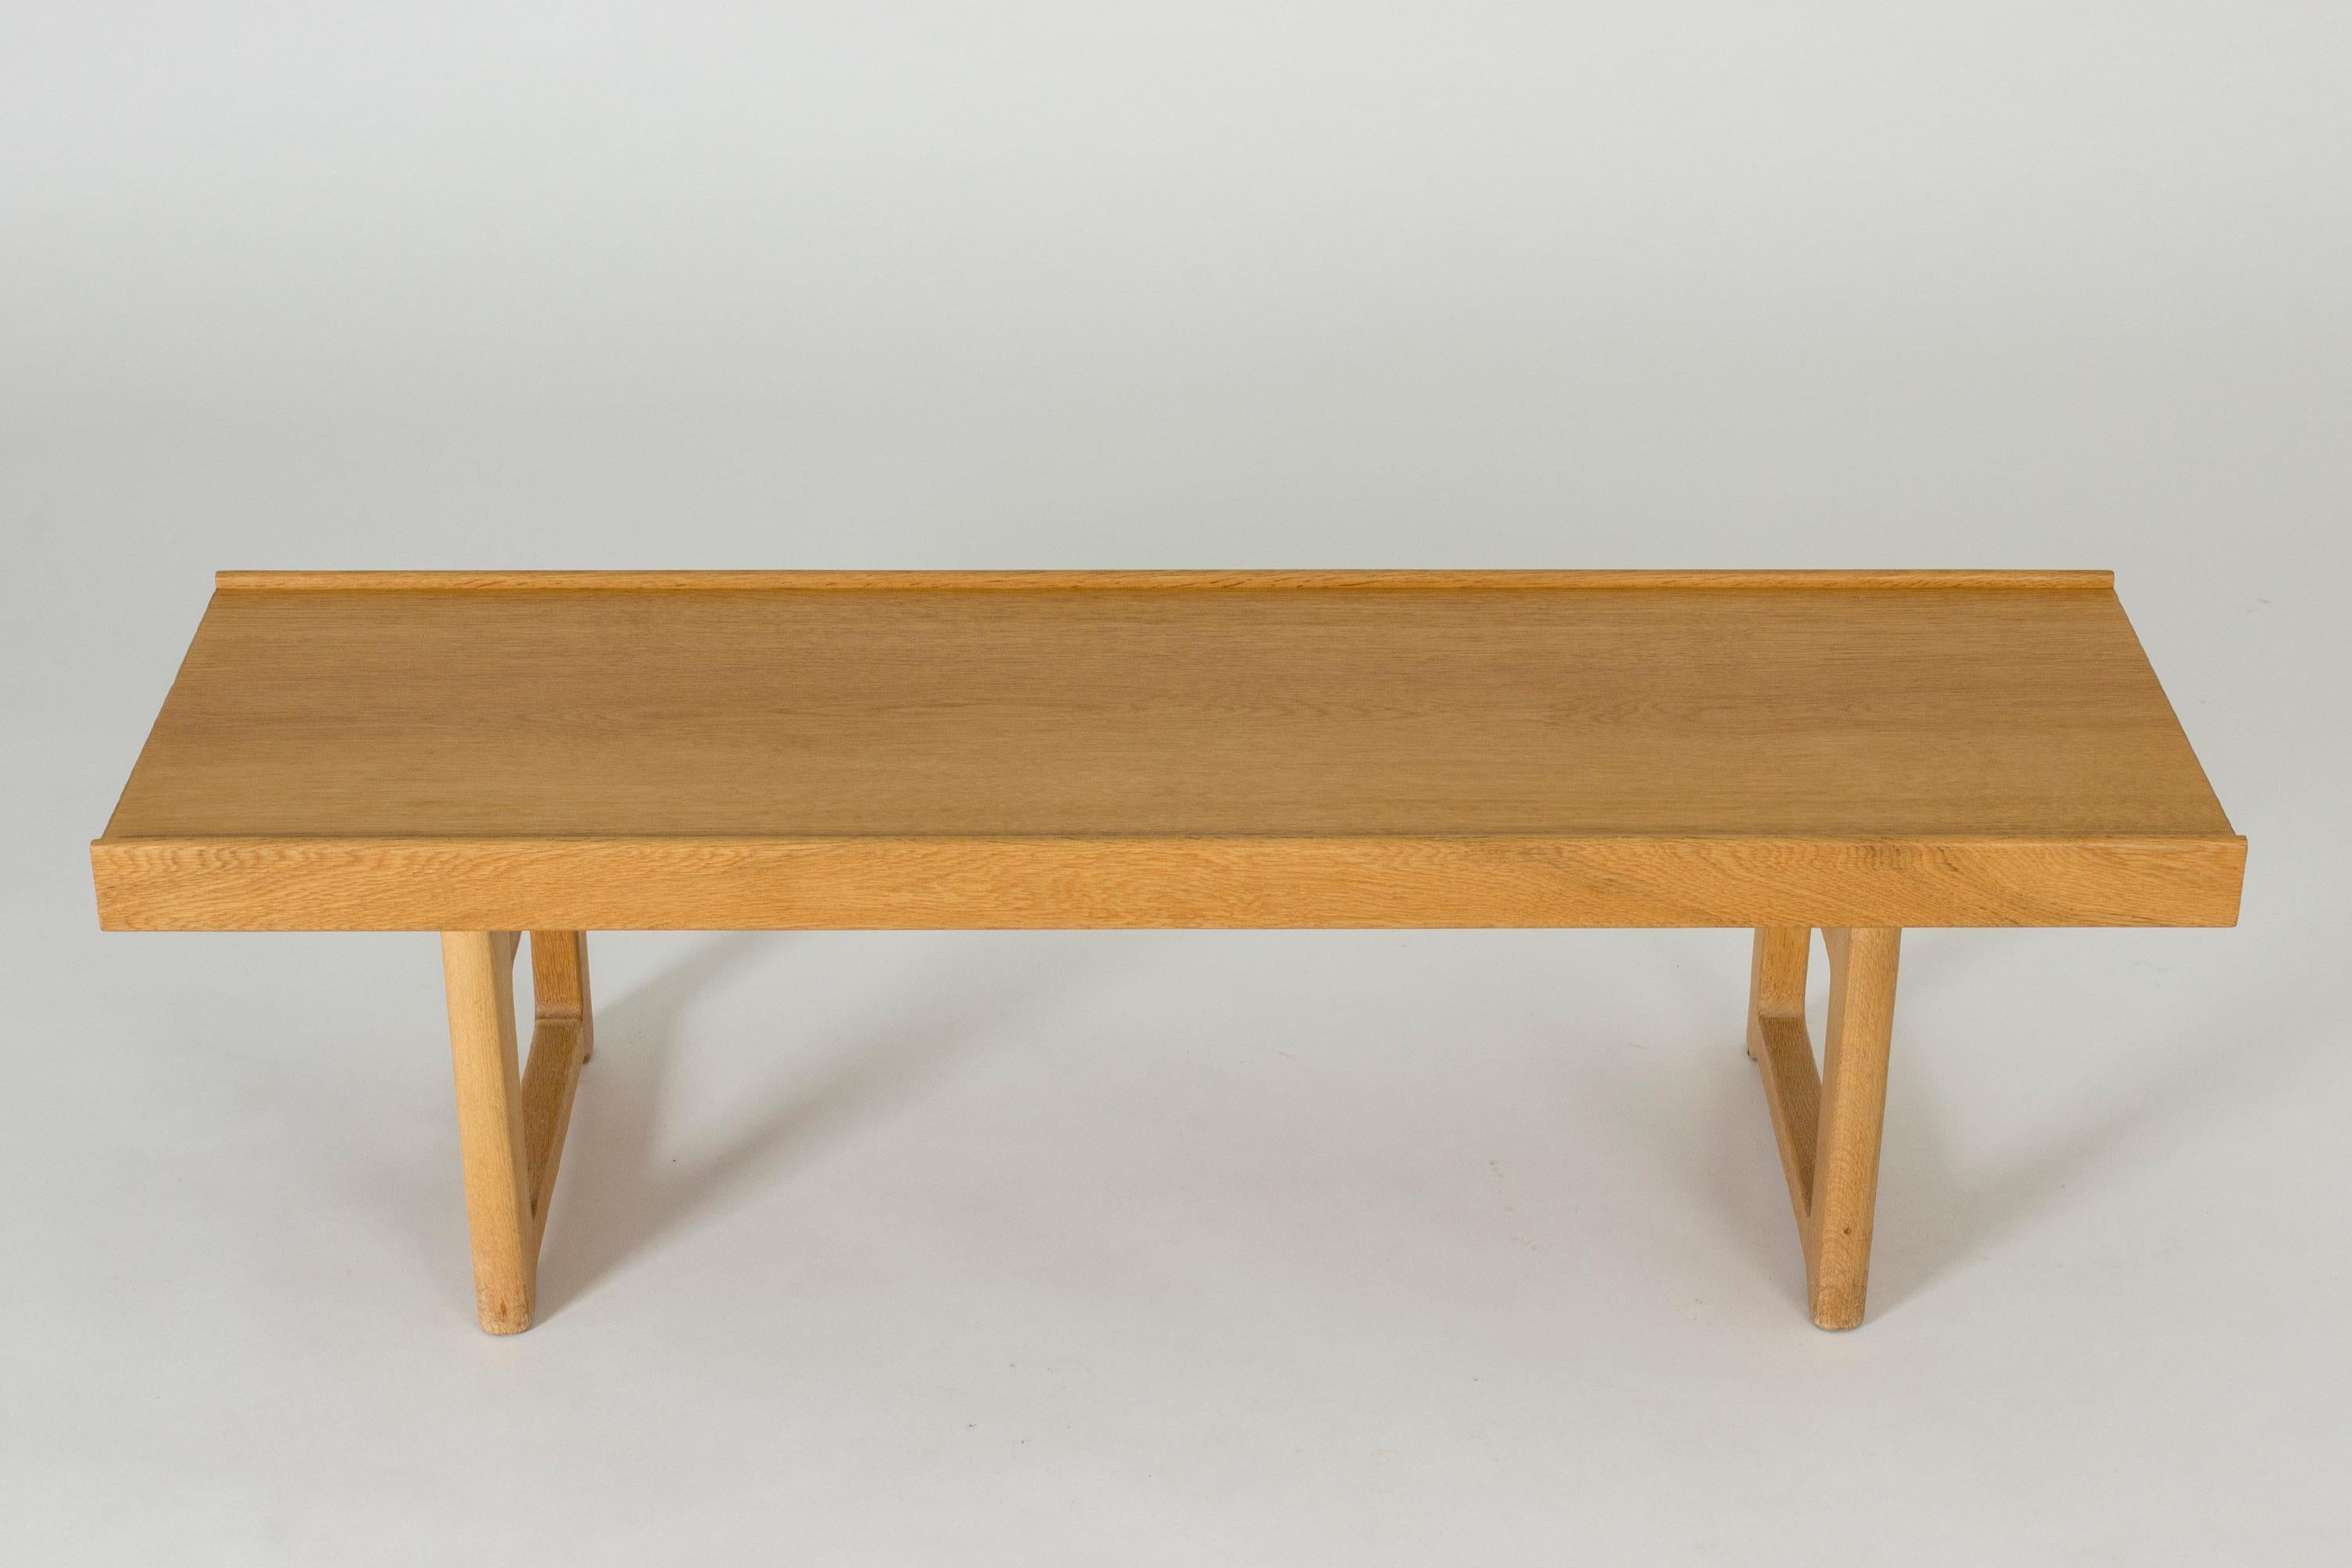 Neat, smaller size “Krobo” bench by Torbjørn Afdal. Made from oak with chunky legs and black metal extenders underneath as decorative details and stabilizers.